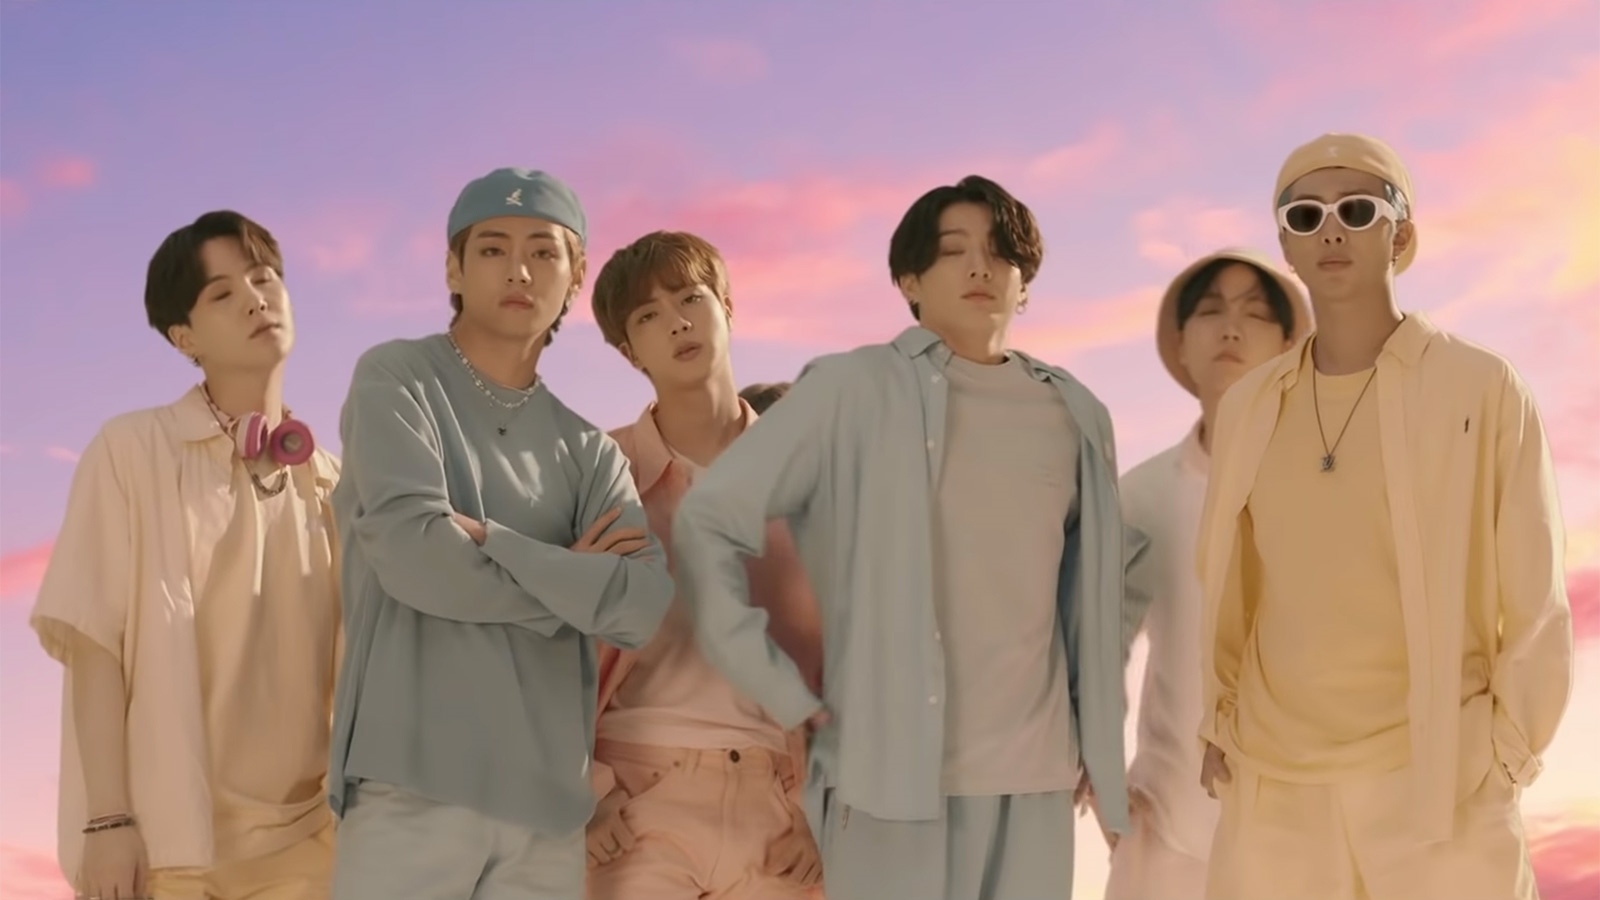 BTS is the first to rack up 100 million YouTube views in 24 hours | DeviceDaily.com